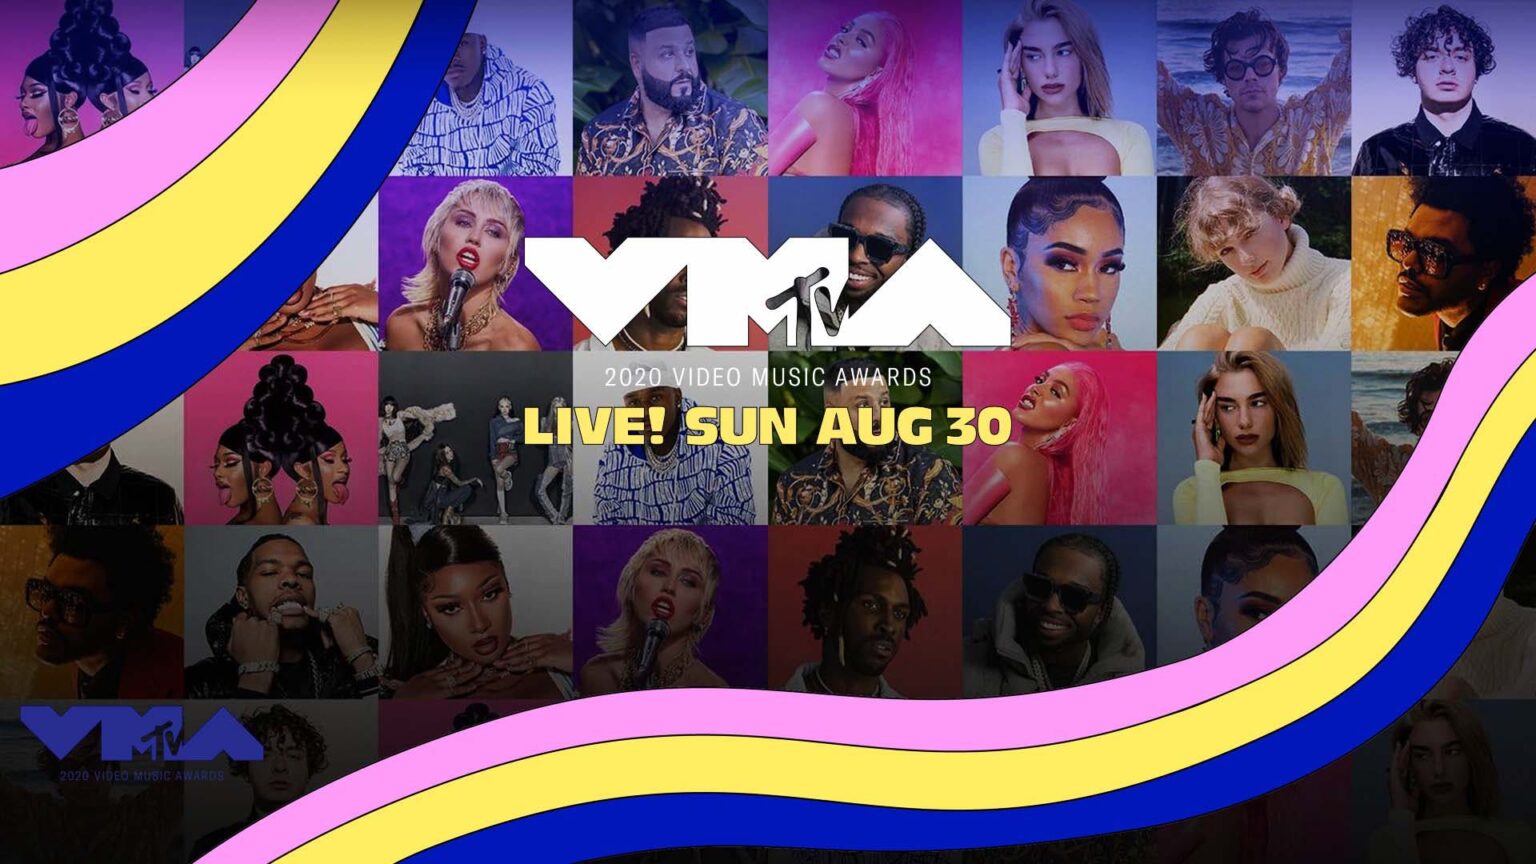 Did the 2020 MTV Video Music Awards doom awards shows? Delve into the VMAs and how the first awards show post-COVID could spell big changes in the future.